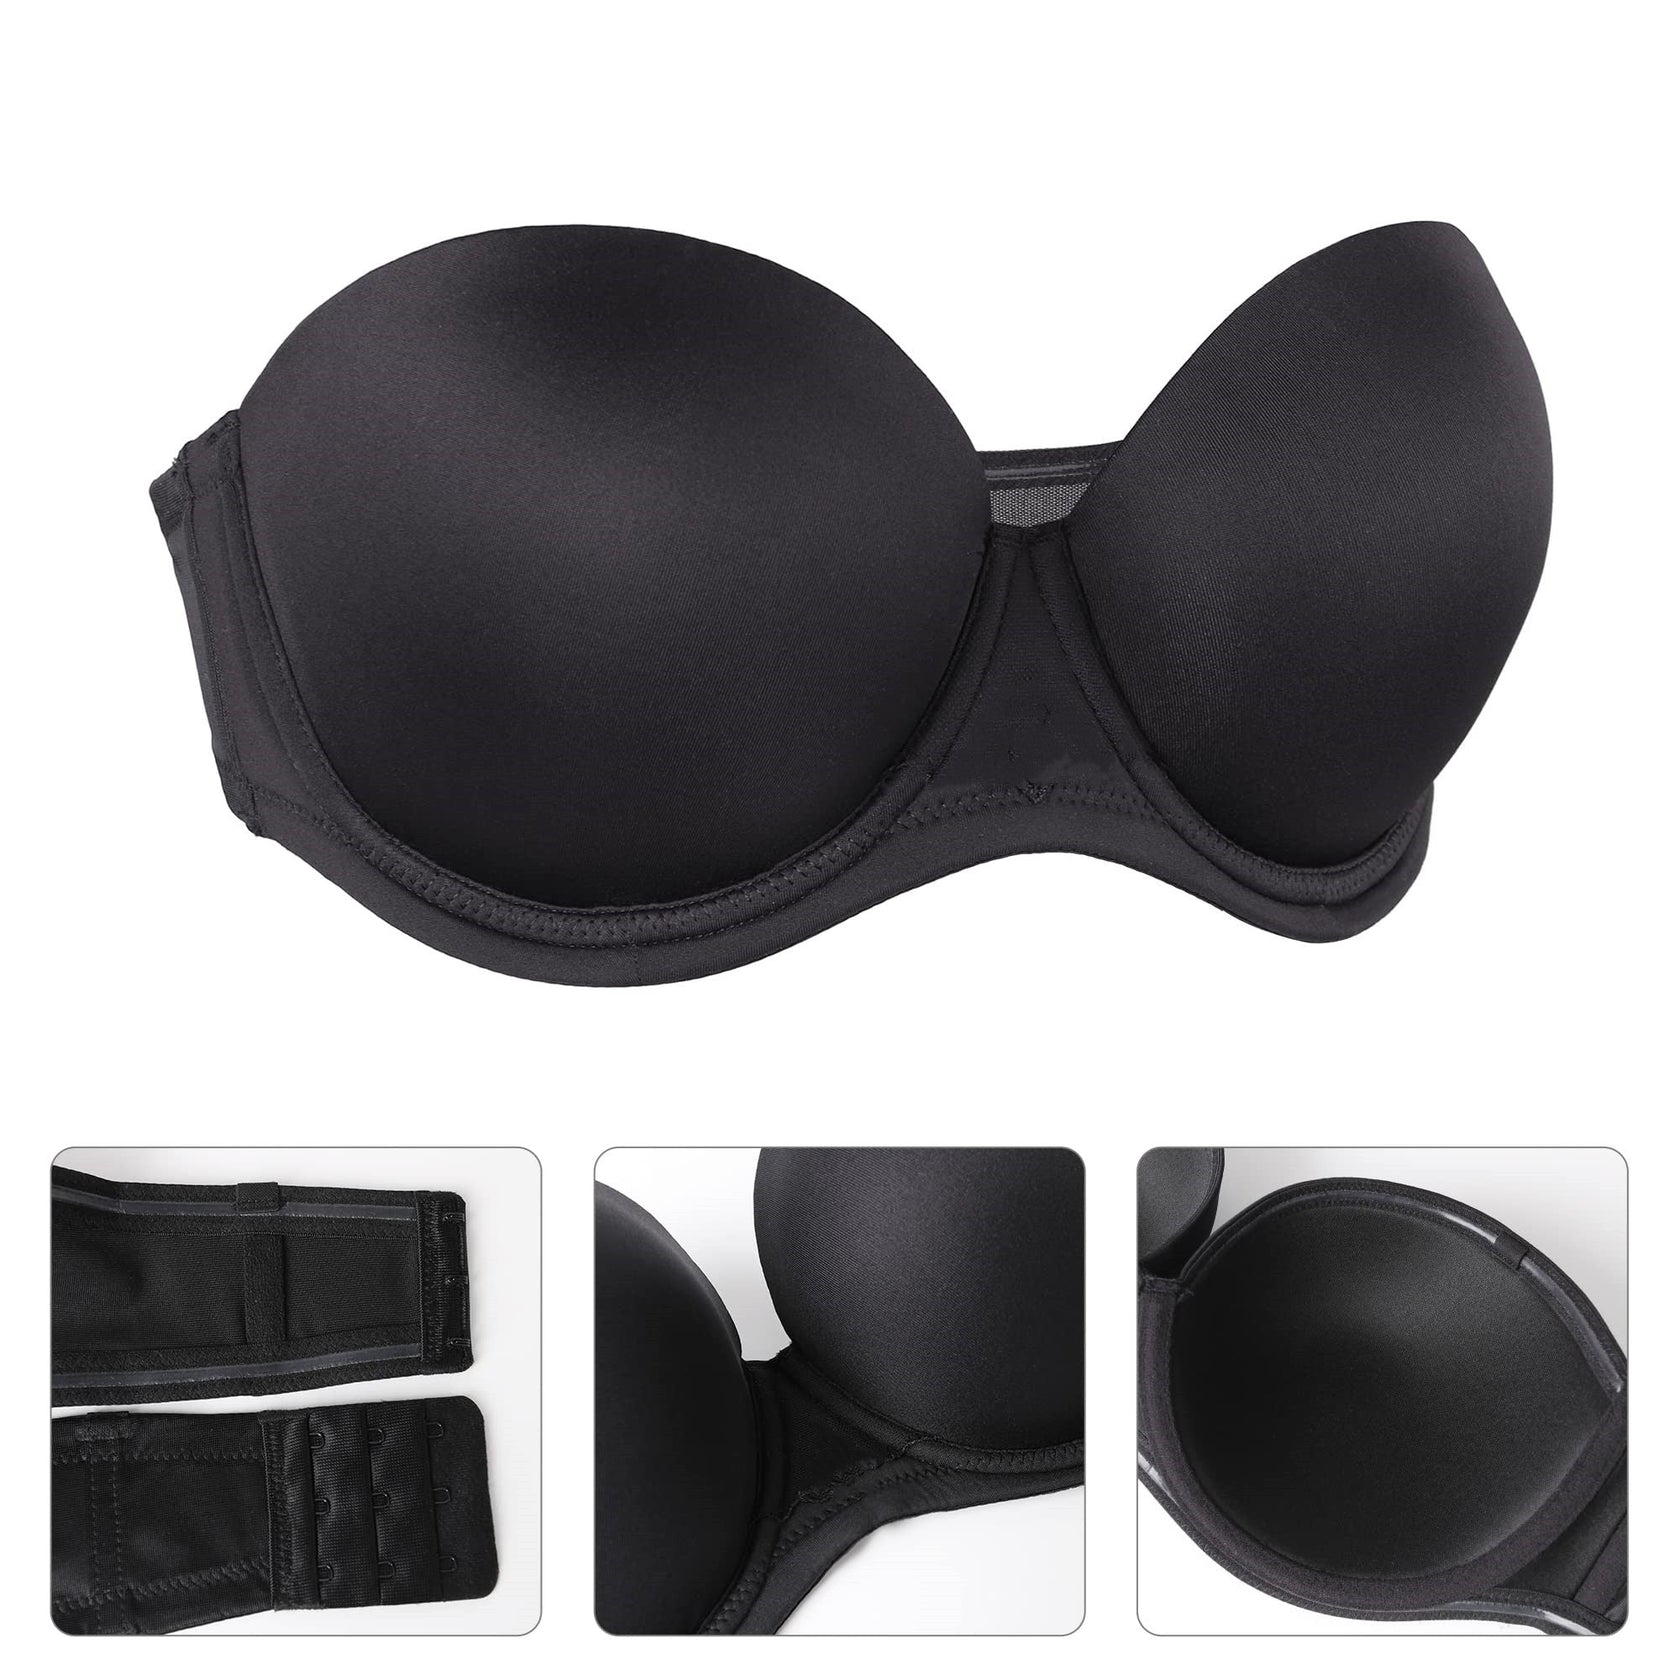 How did you keep your strapless bra from riding up and showing at